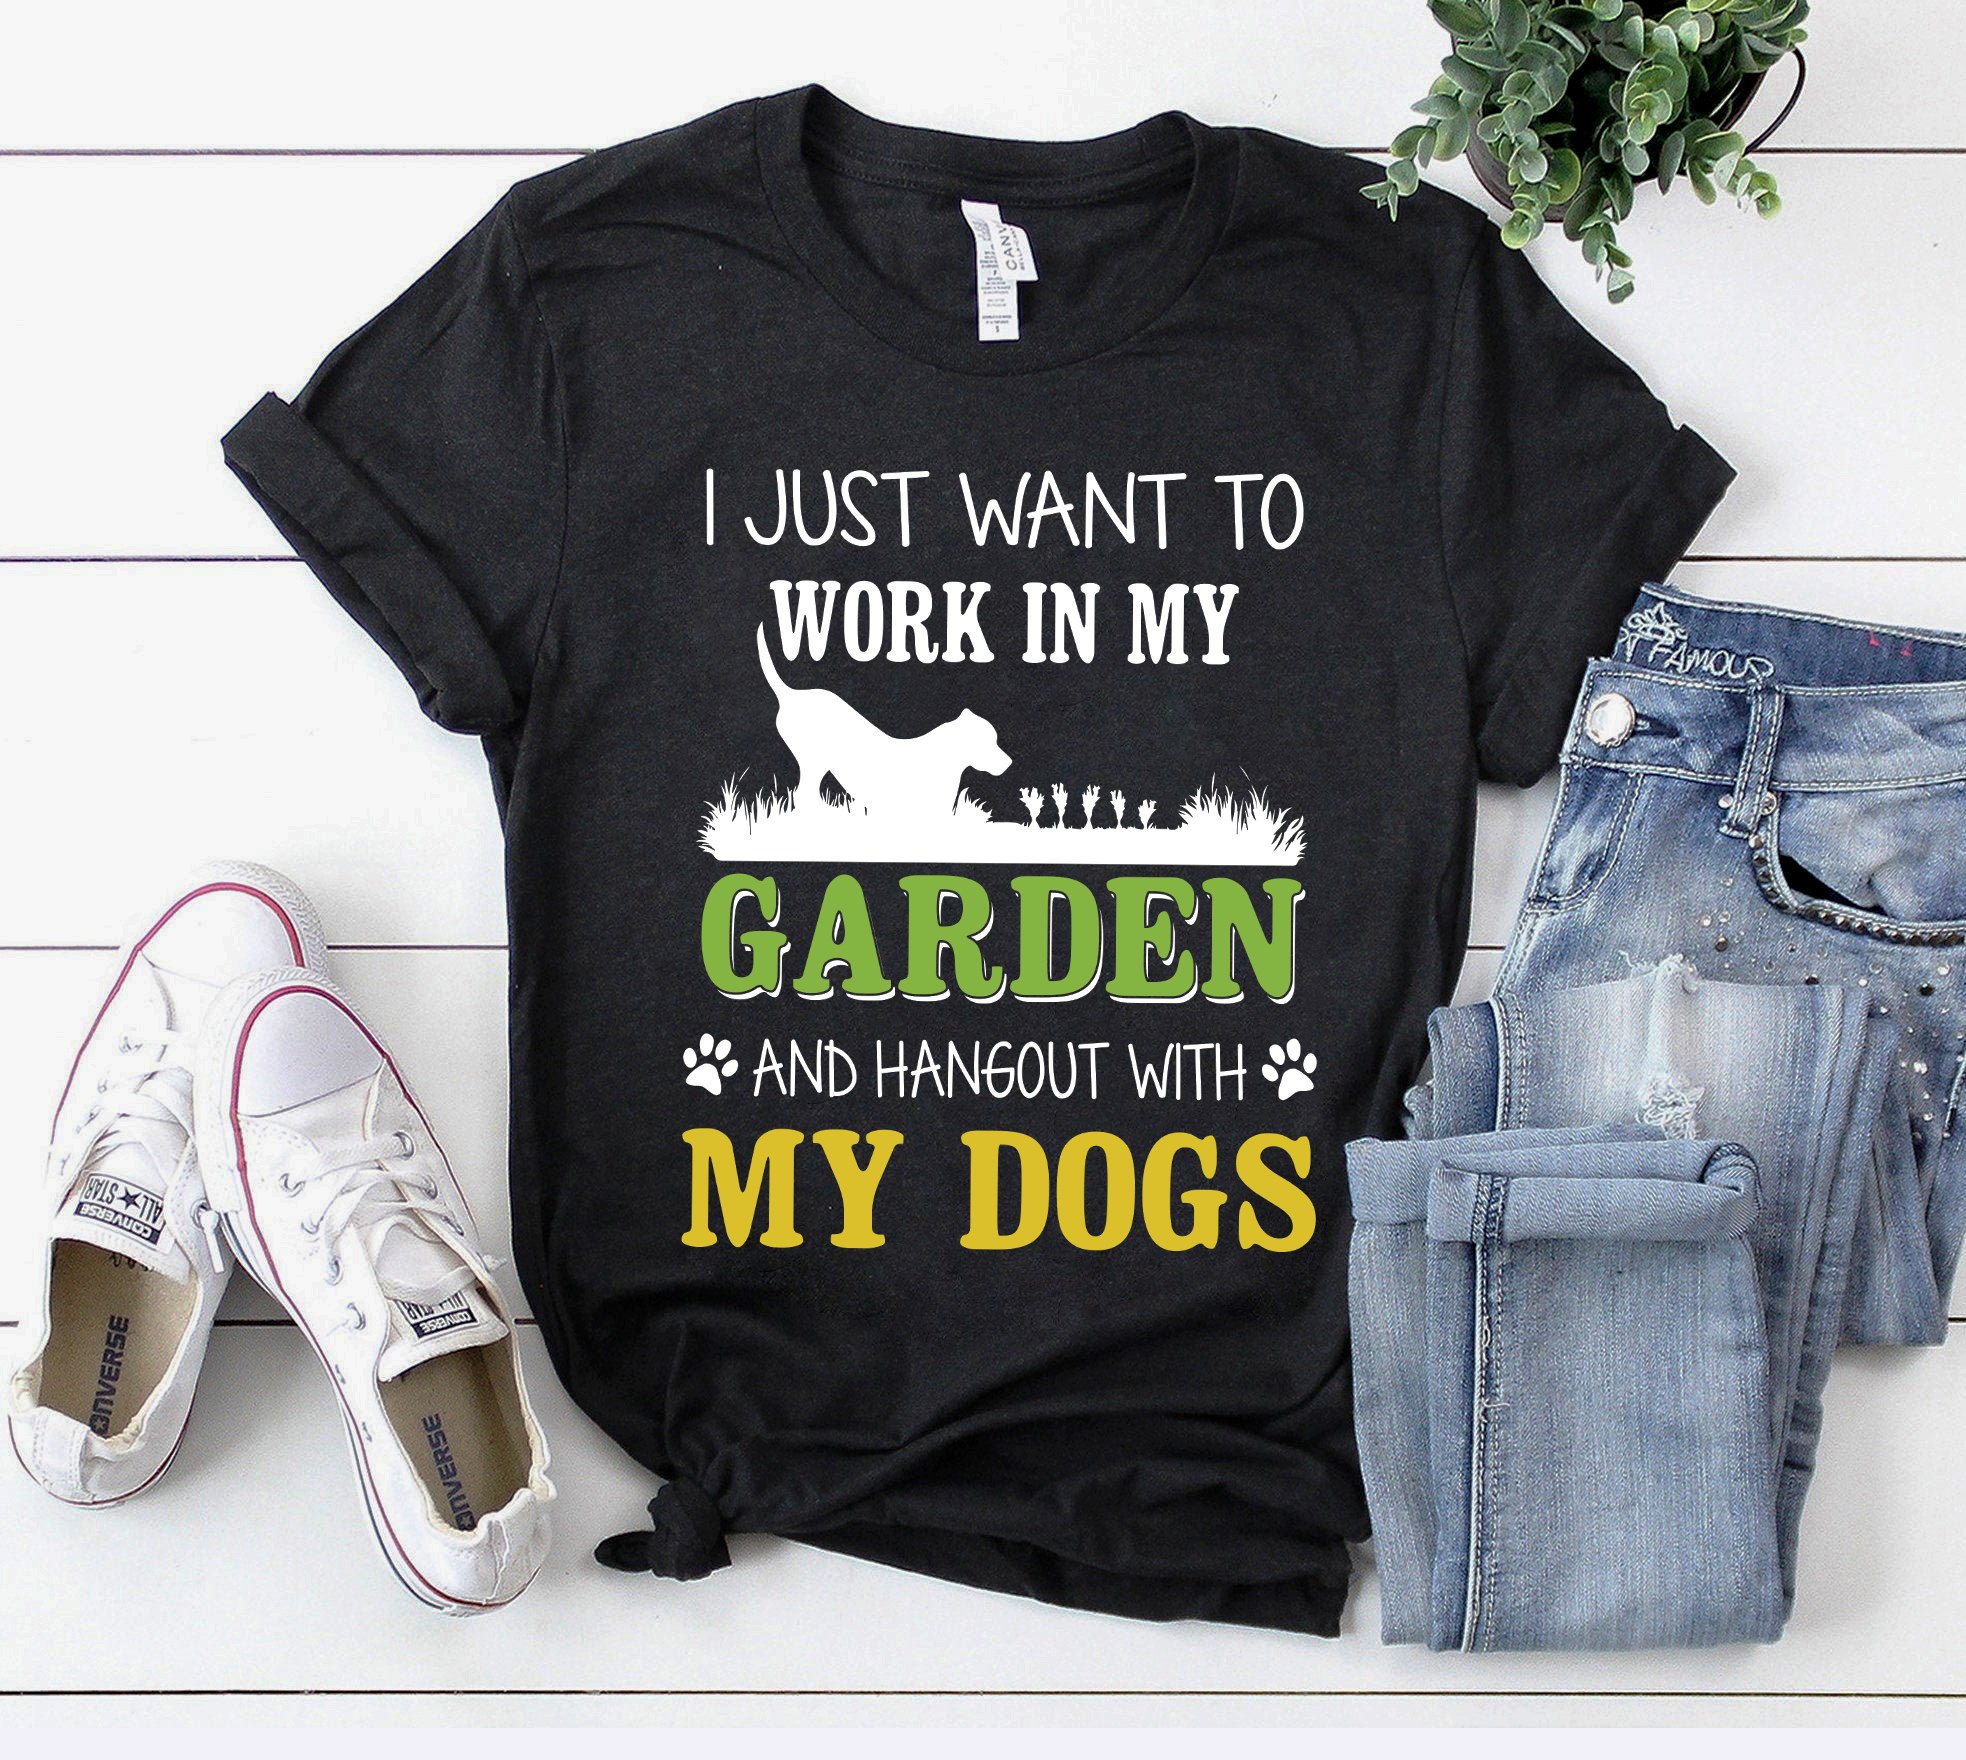 I just want to work in my garden and hangout with my dog.